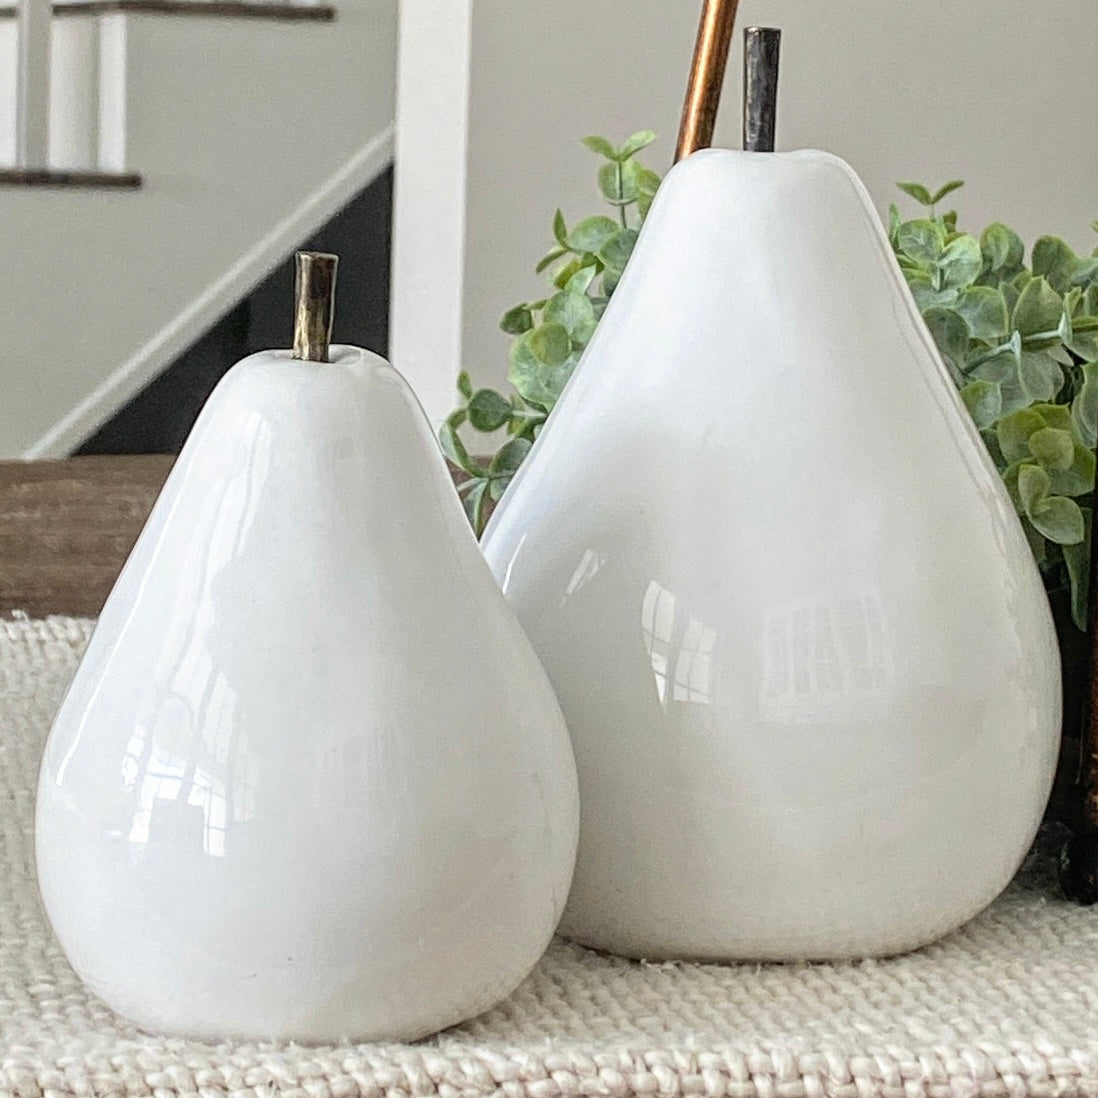 Ceramic Pear, choose from 2 sizes.